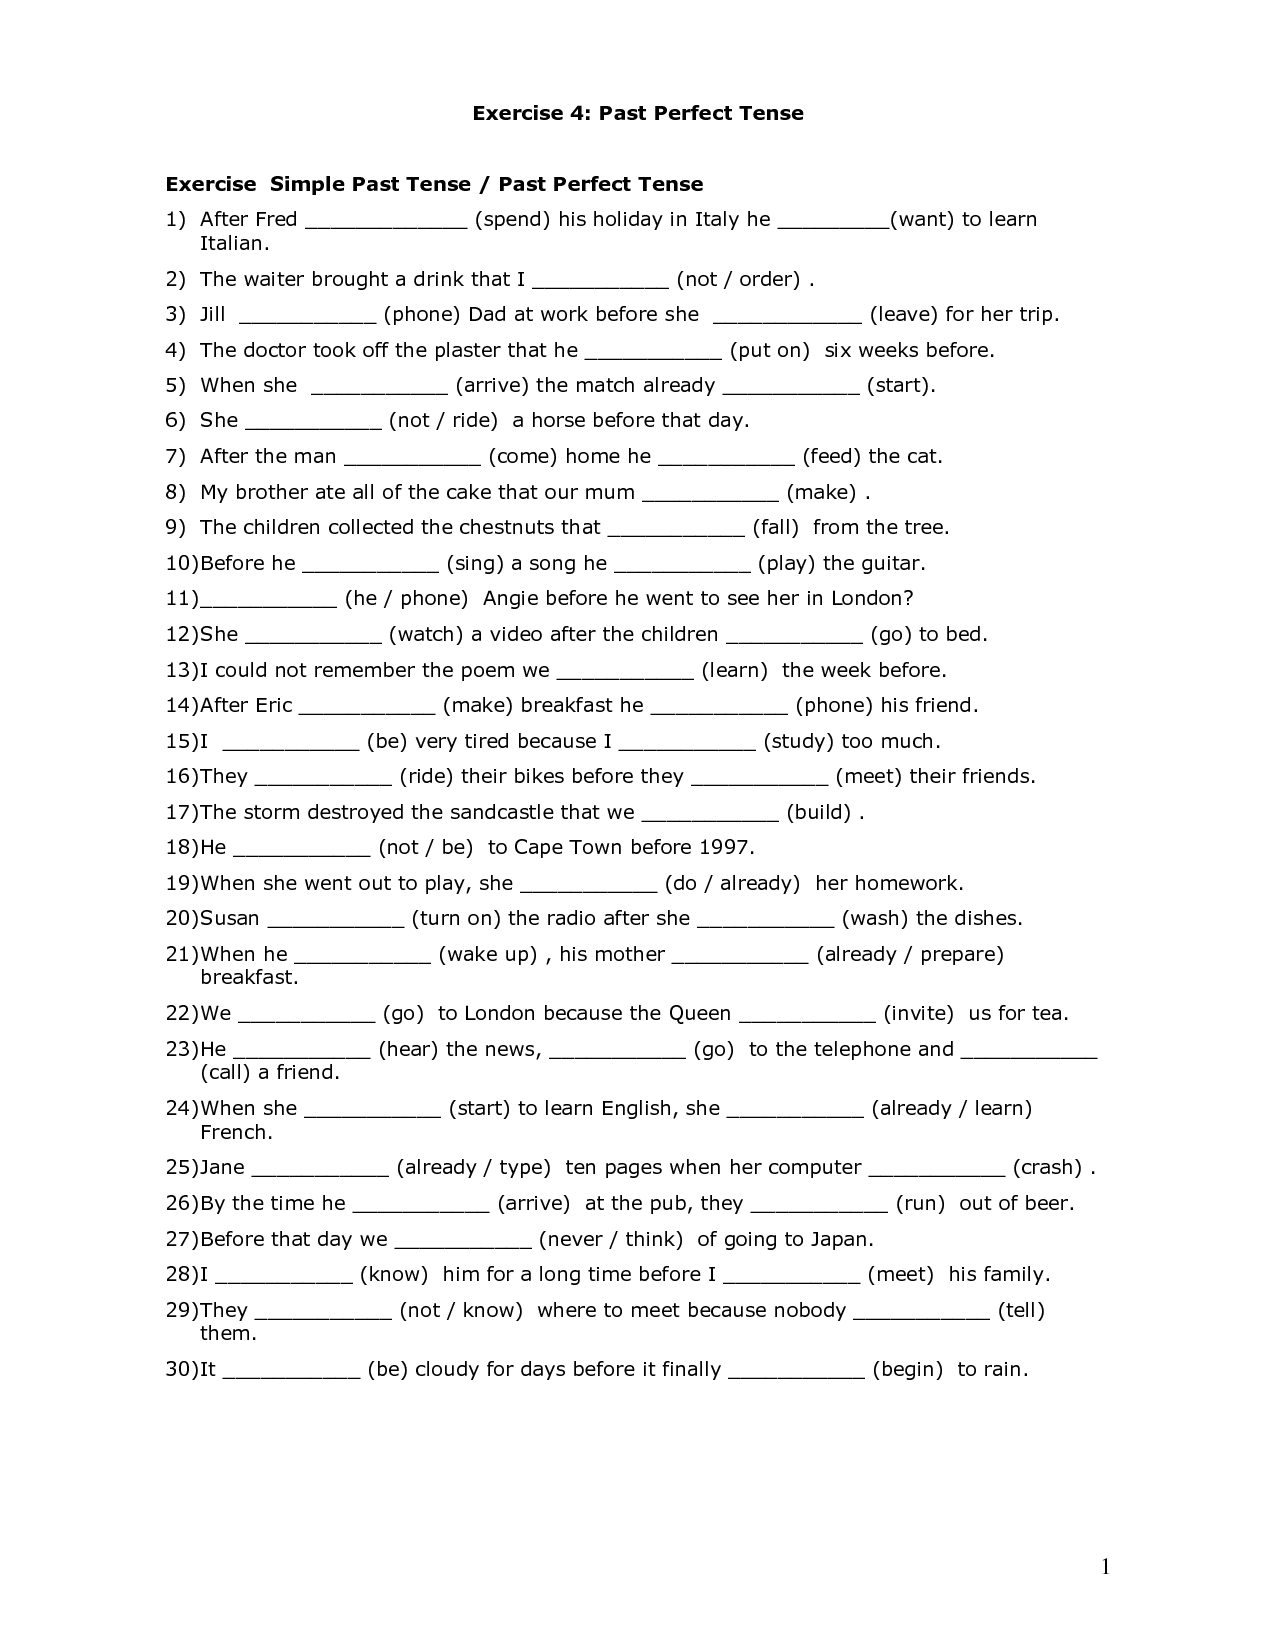 12-best-images-of-present-perfect-past-simple-worksheets-past-perfect-tense-exercises-present